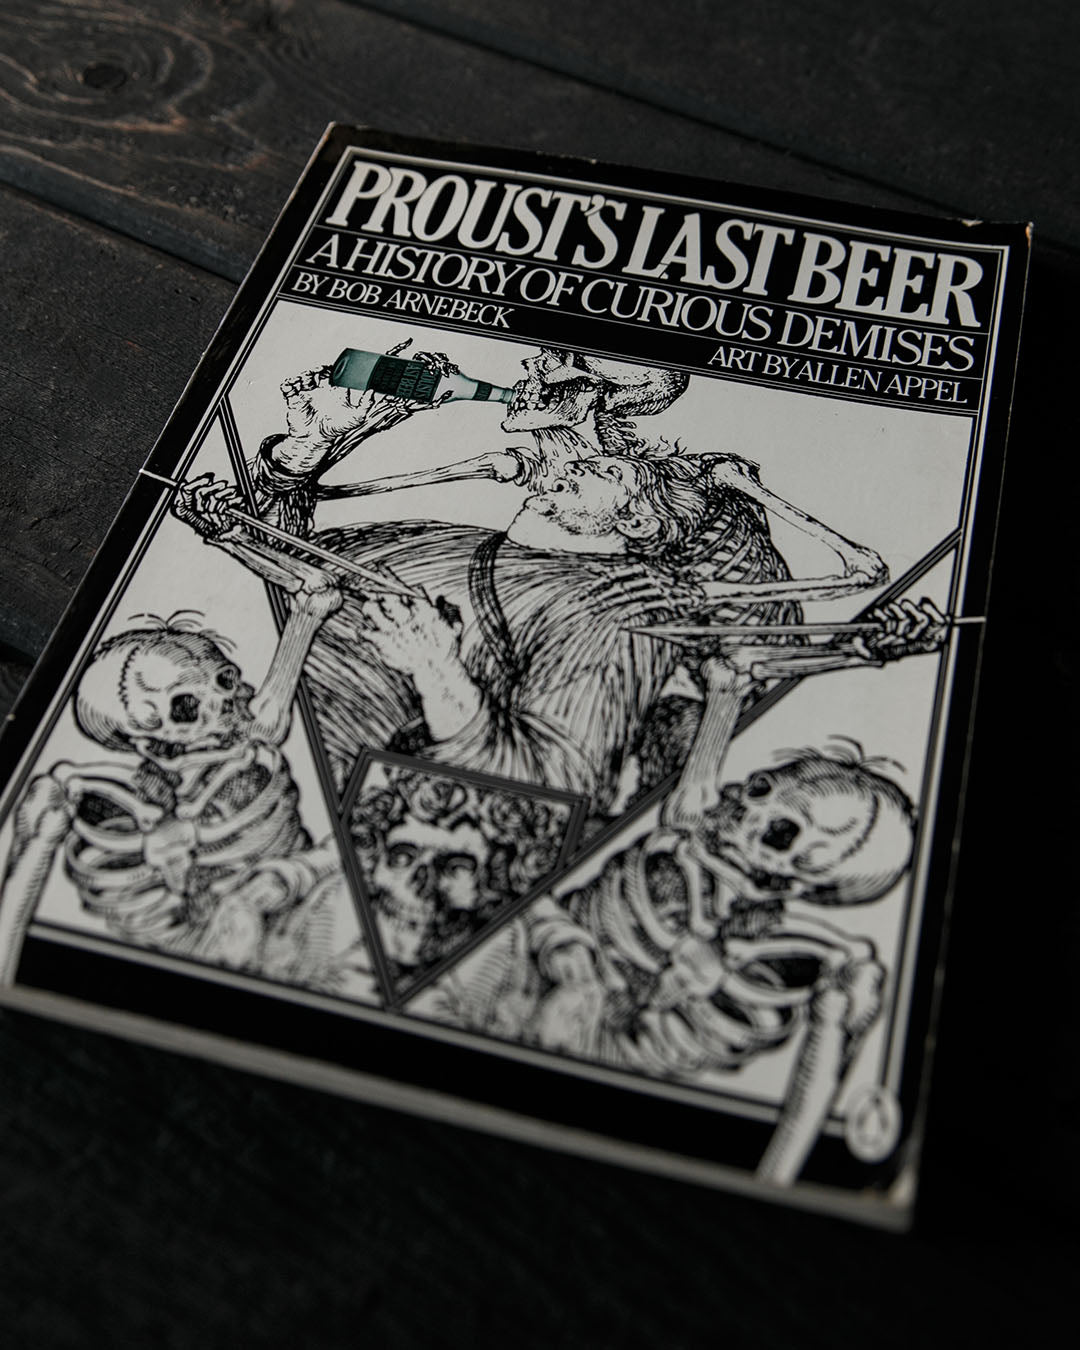 Prousts Last Beer Book